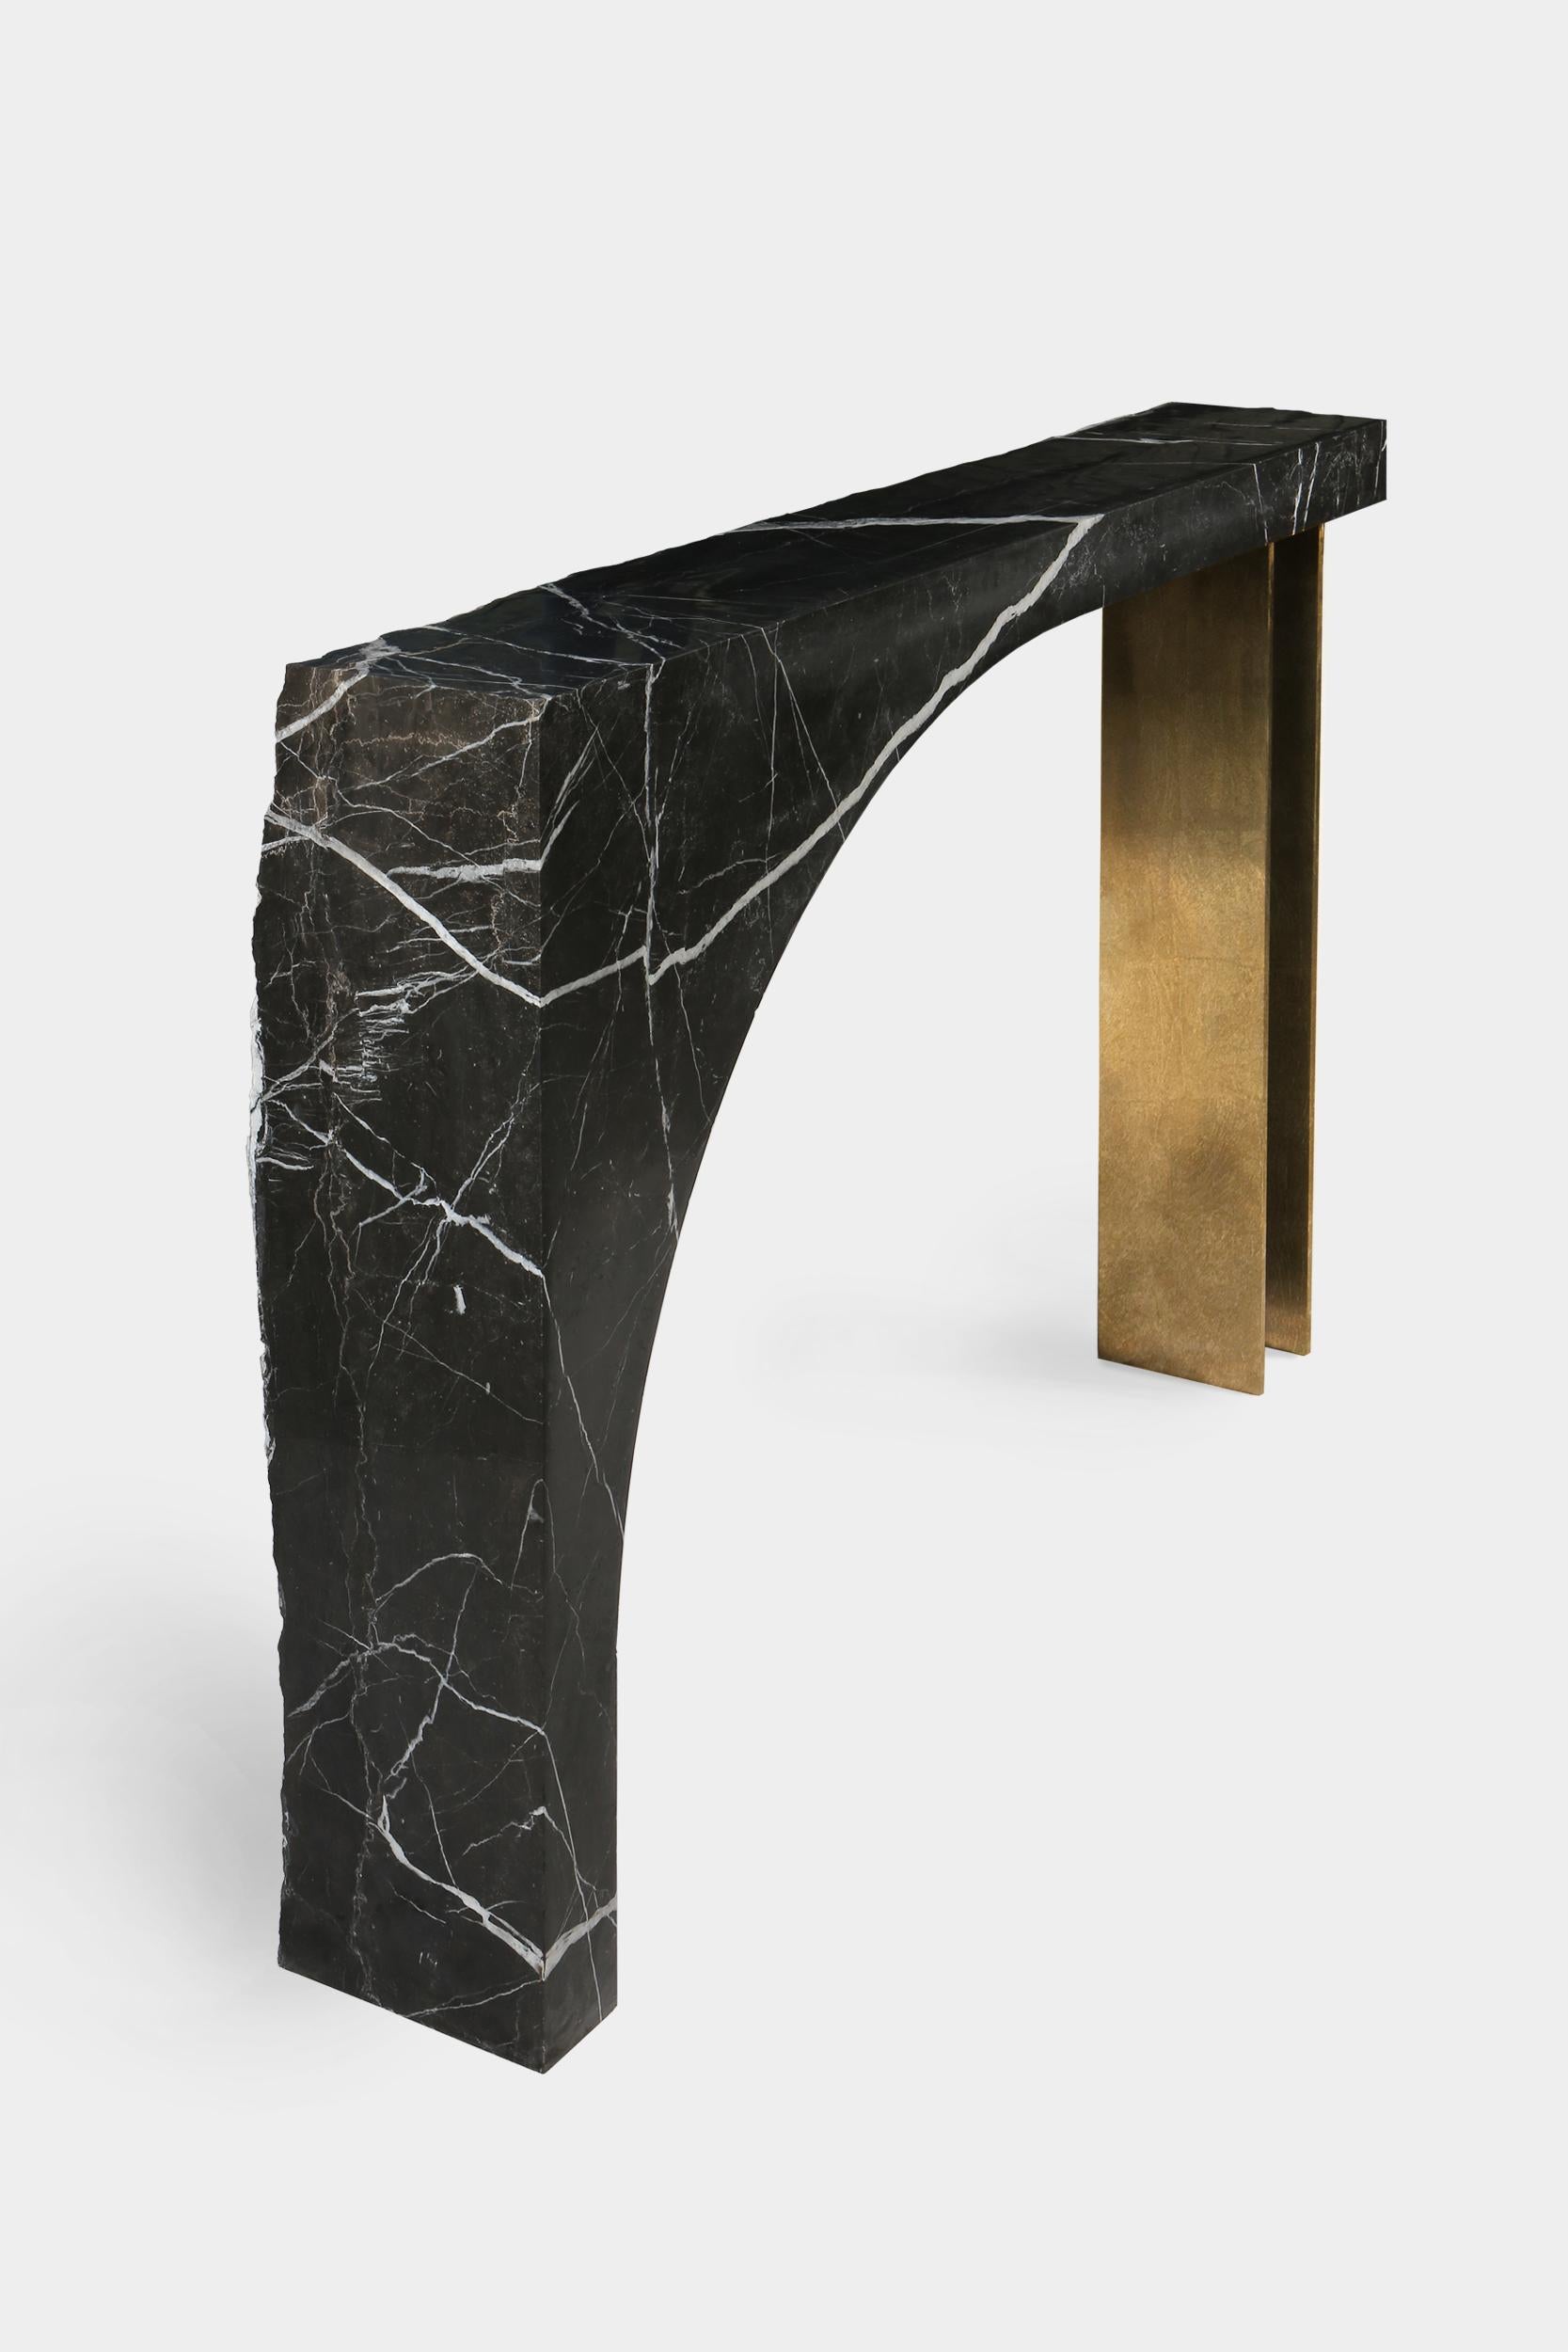 Found II console table No.2 by A Space
Dimensions: D100 xW 25 xH 84cm
Materials: Marble, steel, gold leaf.

Spontaneity, environmental awareness and the primeval nature of the materials are central themes explored in this collection, which